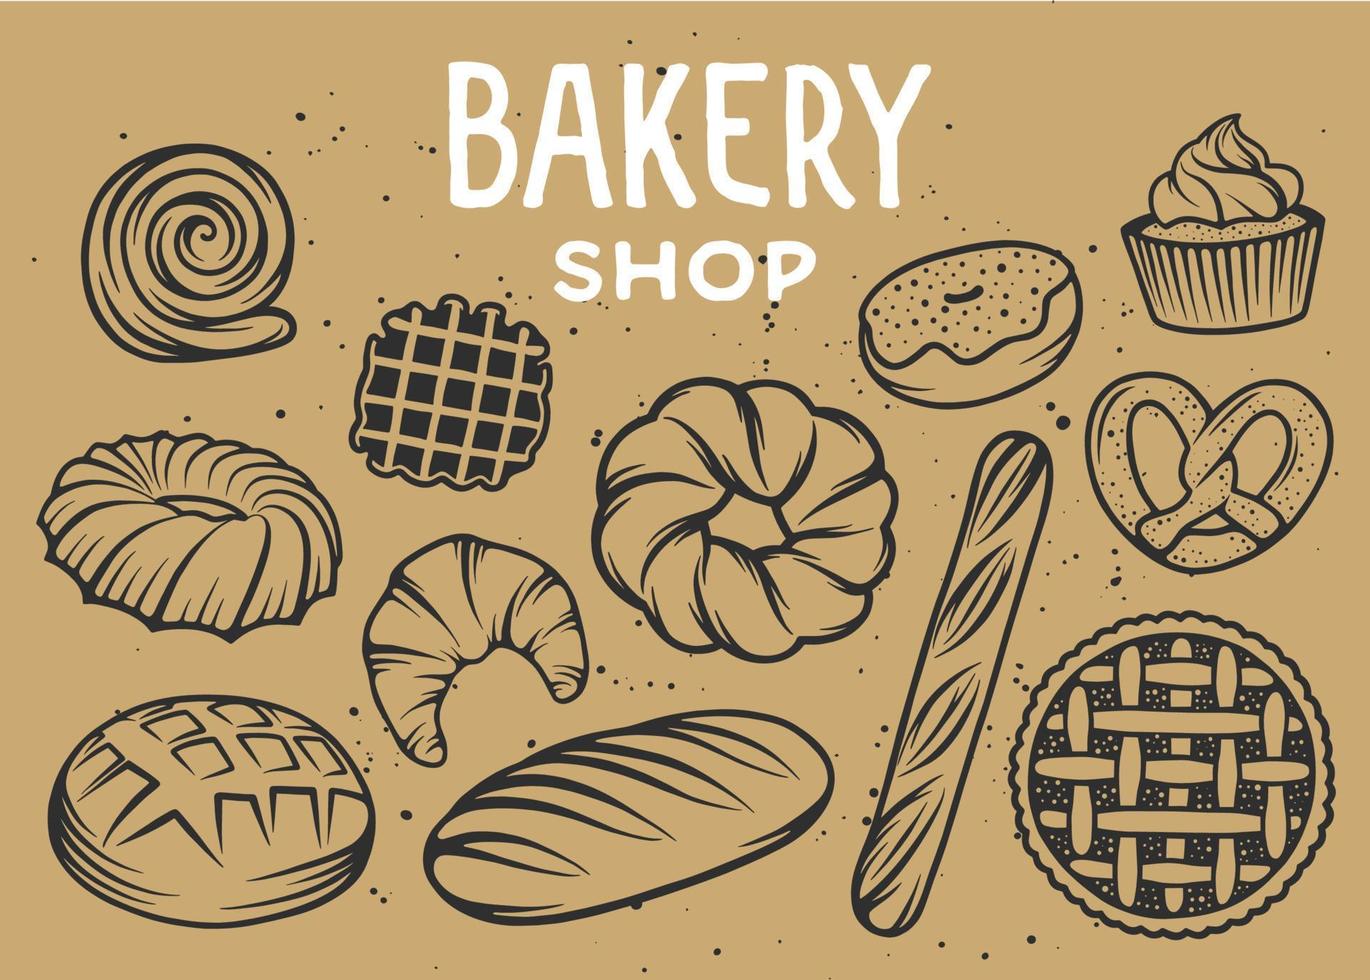 Set of vector bakery engraved elements. Typography design with bread, pastry, pie, buns, sweets, cupcake. Collection of modern linear graphic, food hand drawn sketch. Bakery shop. Top view.